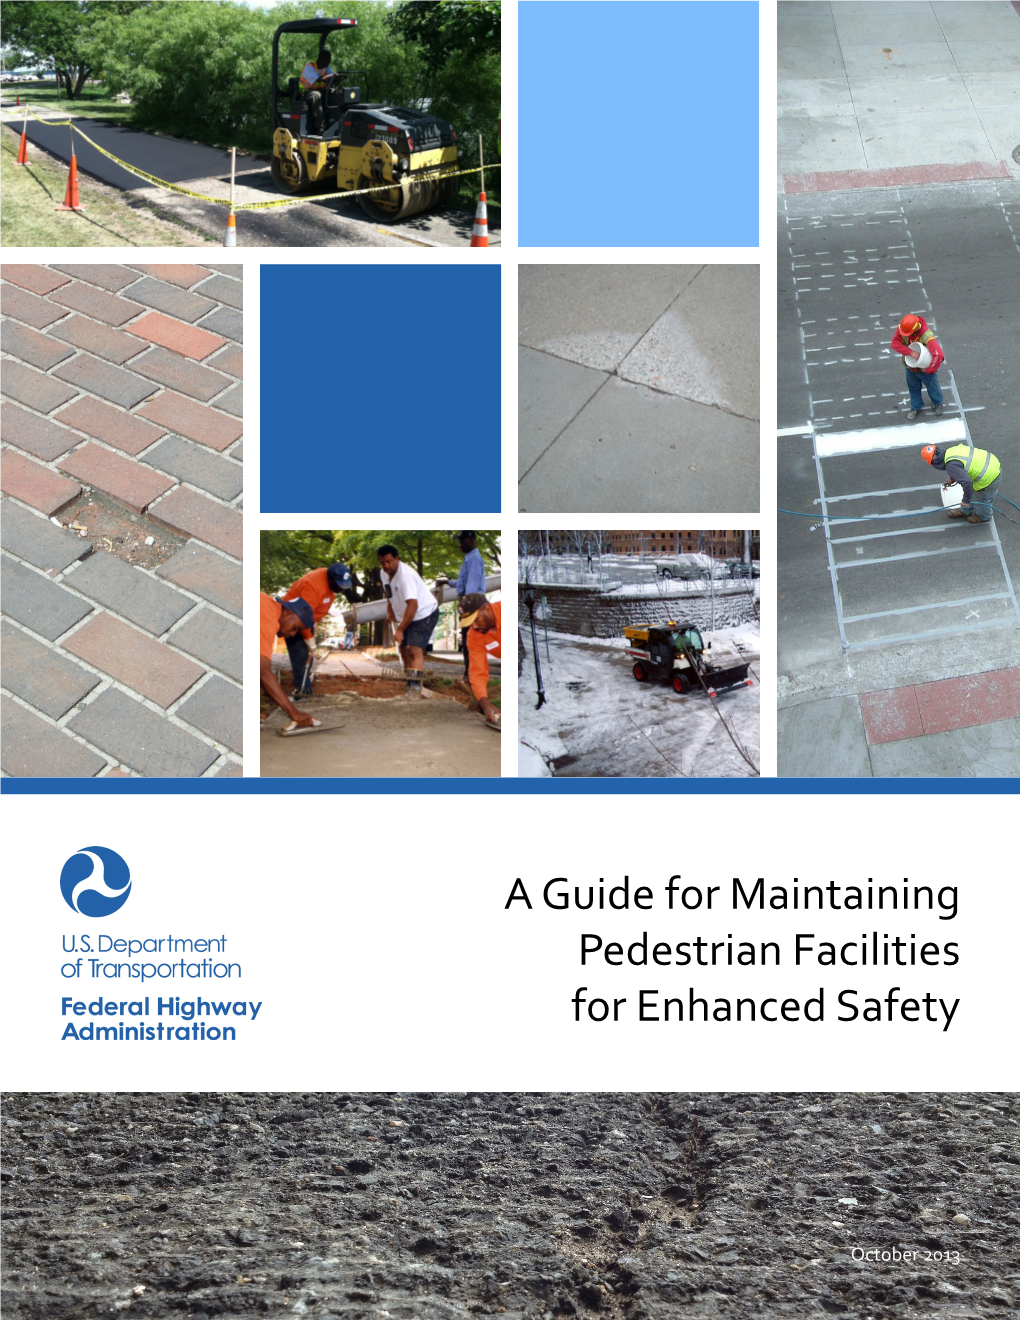 Guide for Maintaining Pedestrian Facilities for Enhanced Safety